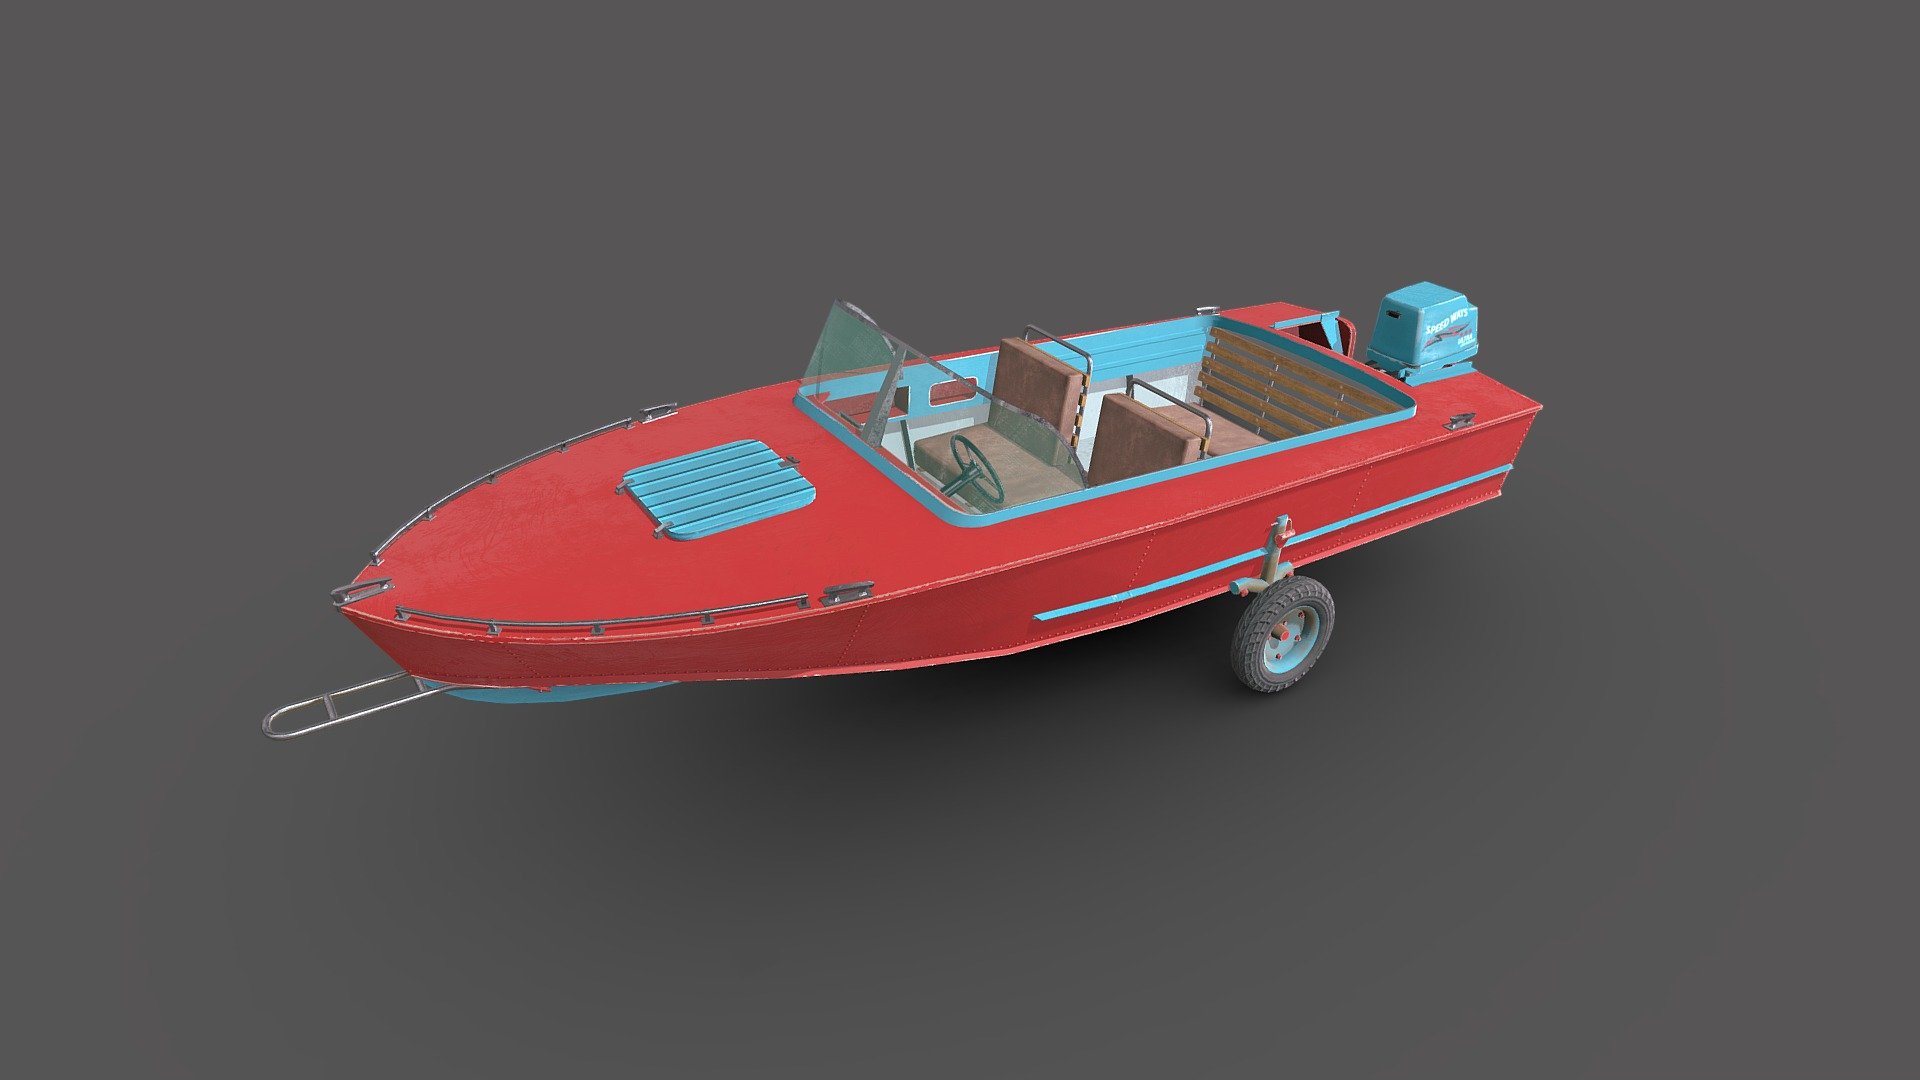 Old Speedboat




-Low-poly ready to use in Games AR/VR (13500 tris)

-Created in 3ds MAX 2018 saved as 2015 both files are included no plugins used.

-Textures are in PNG format 4096x4096 PBR metalness 1 set textures

-File Units: Centimeter

-Available formats:MAX 2018 and 2015, OBJ, MTL, FBX, .tbscene.

-If you need any other file format you can always request it.

-All formats include materials and textures.
 - Old Speedboat - Buy Royalty Free 3D model by MaX3Dd 3d model